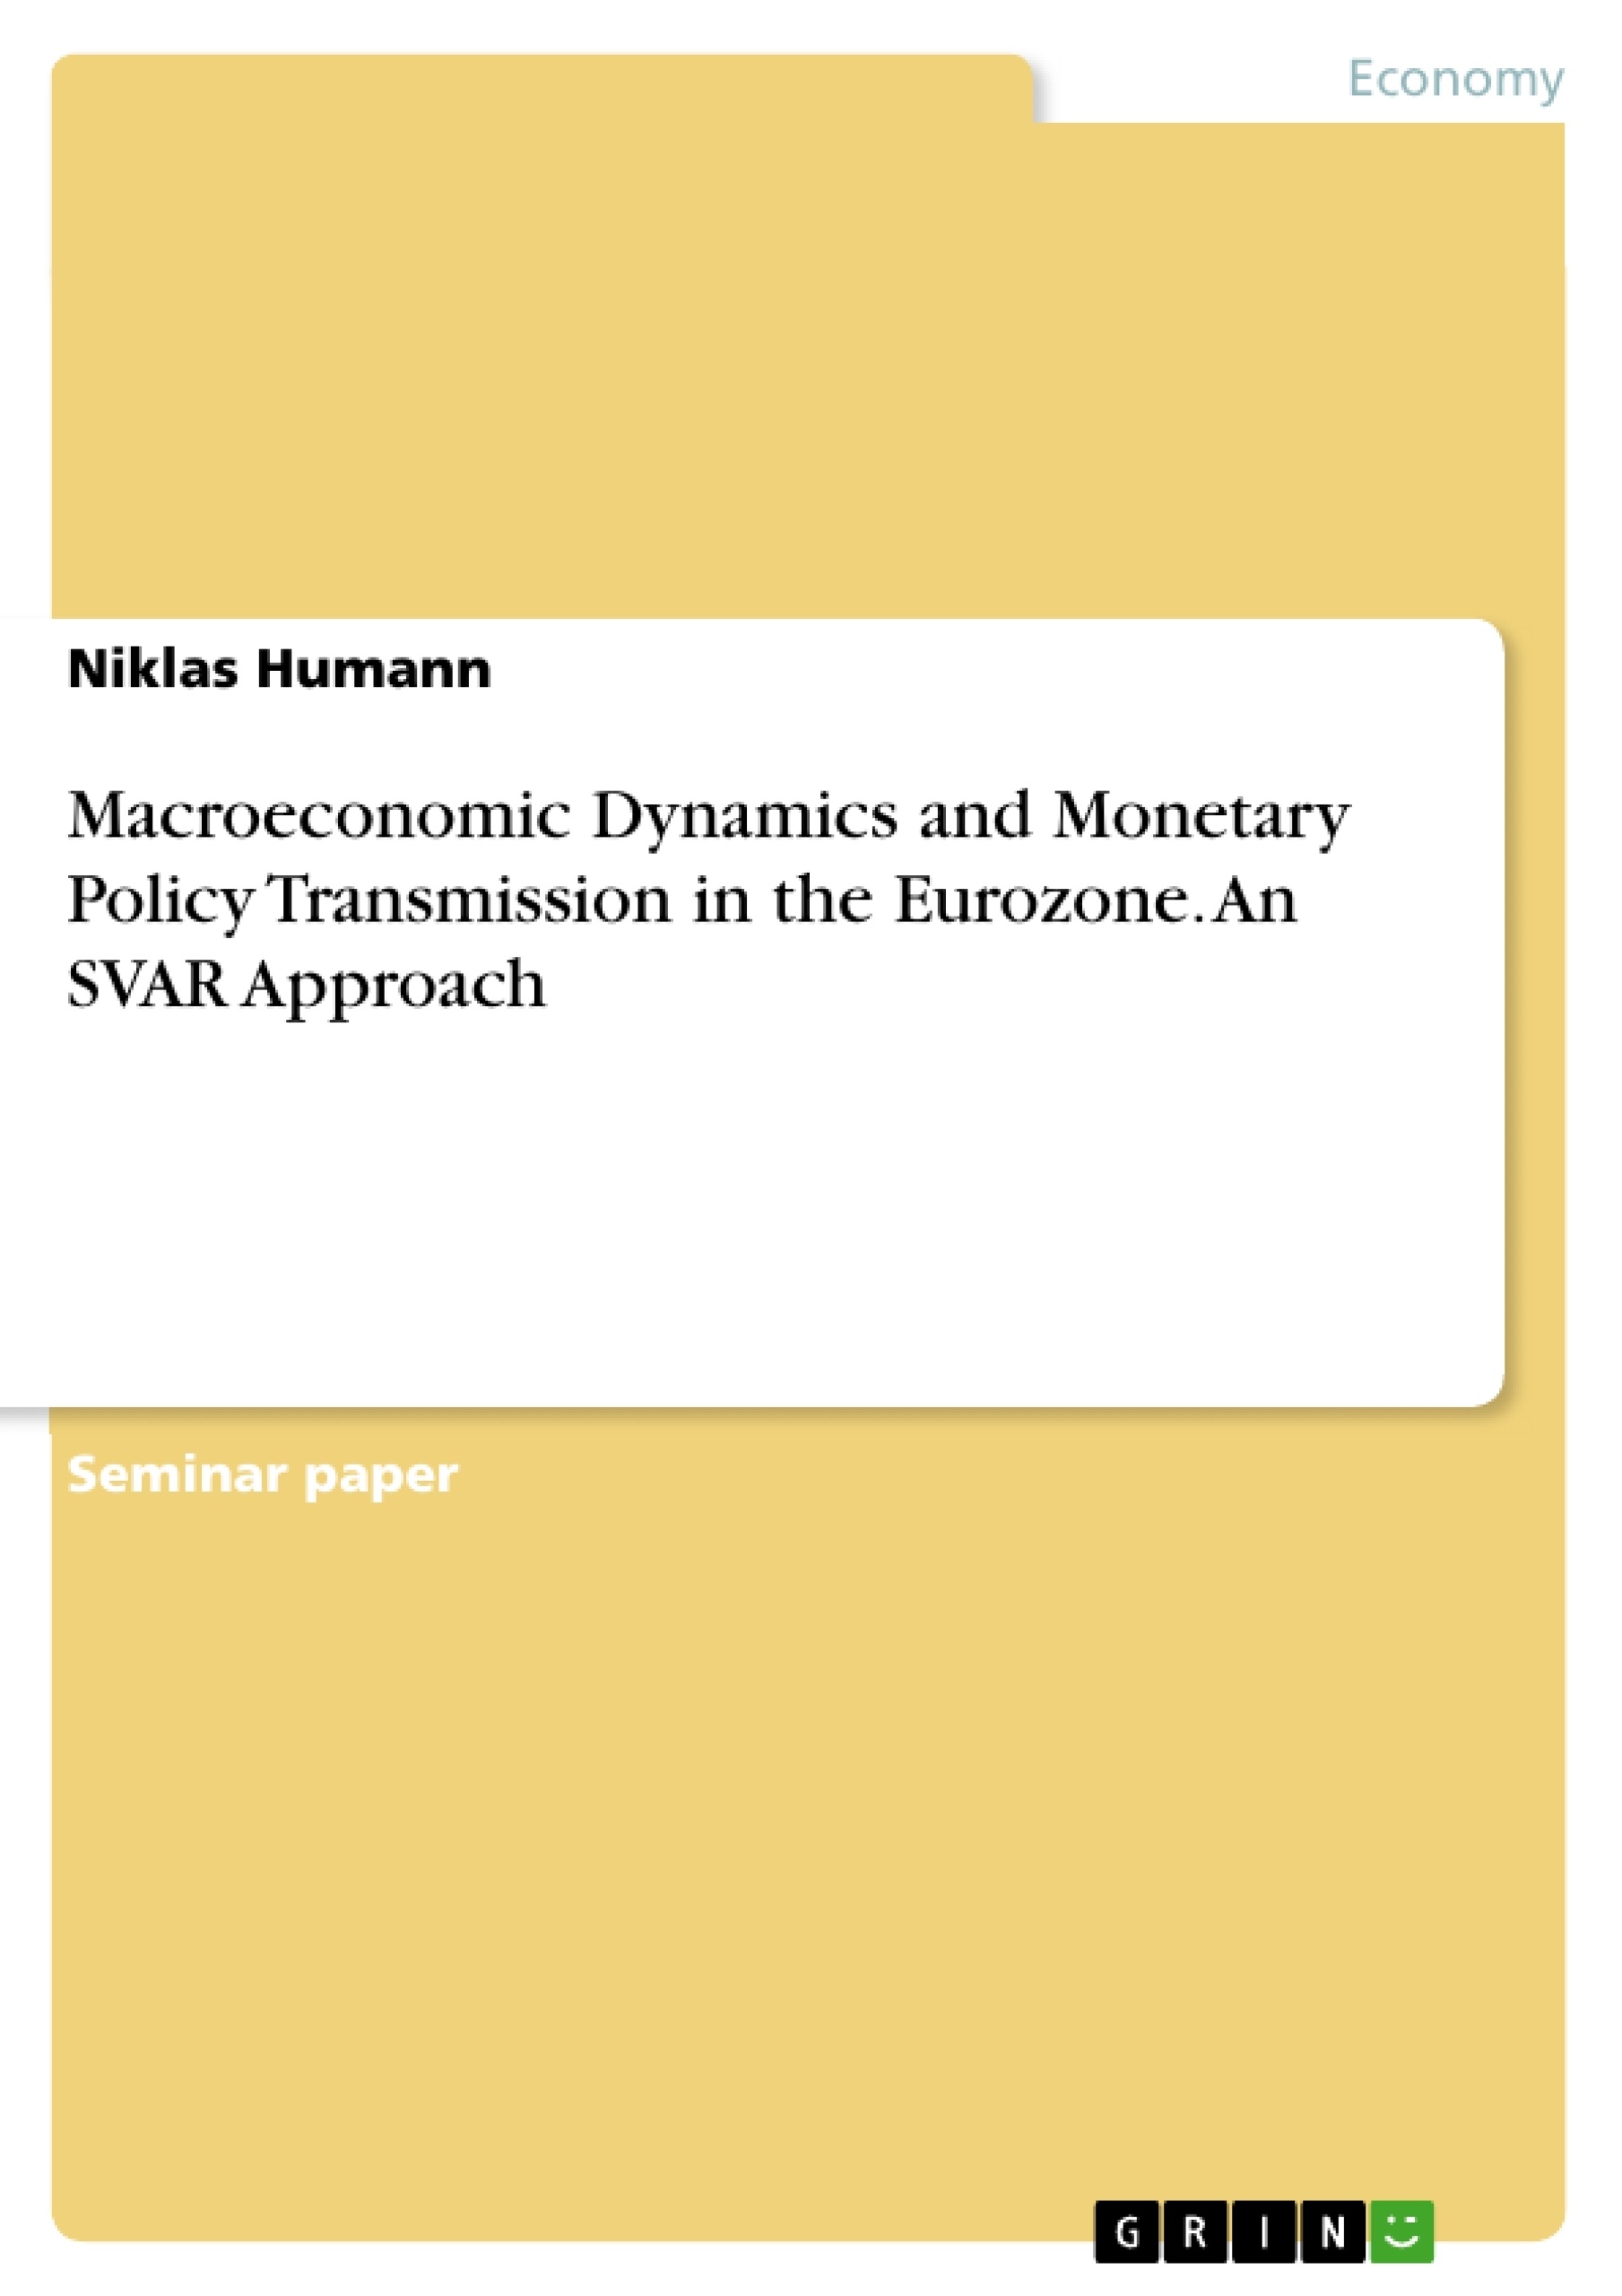 Title: Macroeconomic Dynamics and Monetary Policy Transmission in the Eurozone. An SVAR Approach